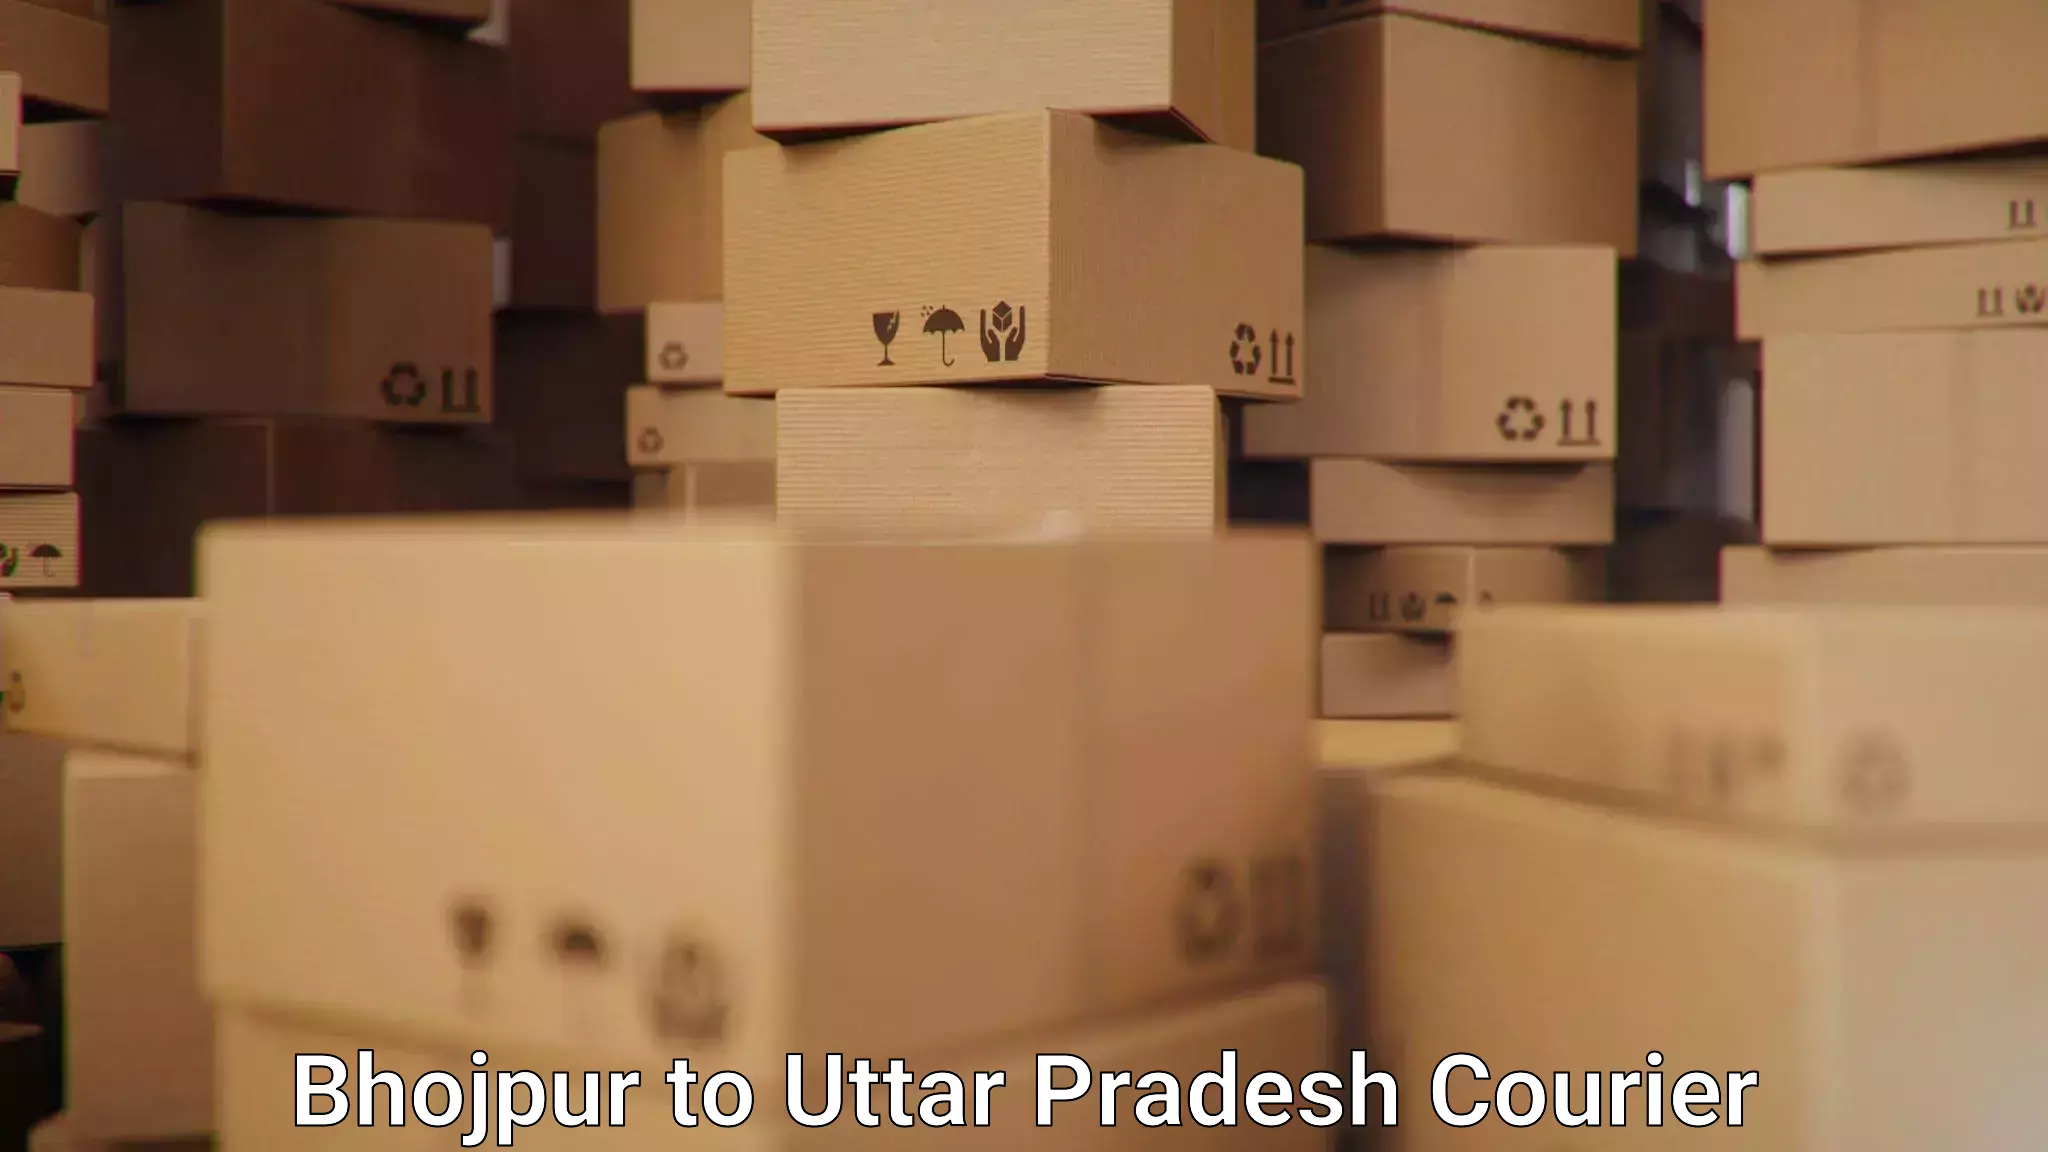 On-demand shipping options Bhojpur to Aligarh